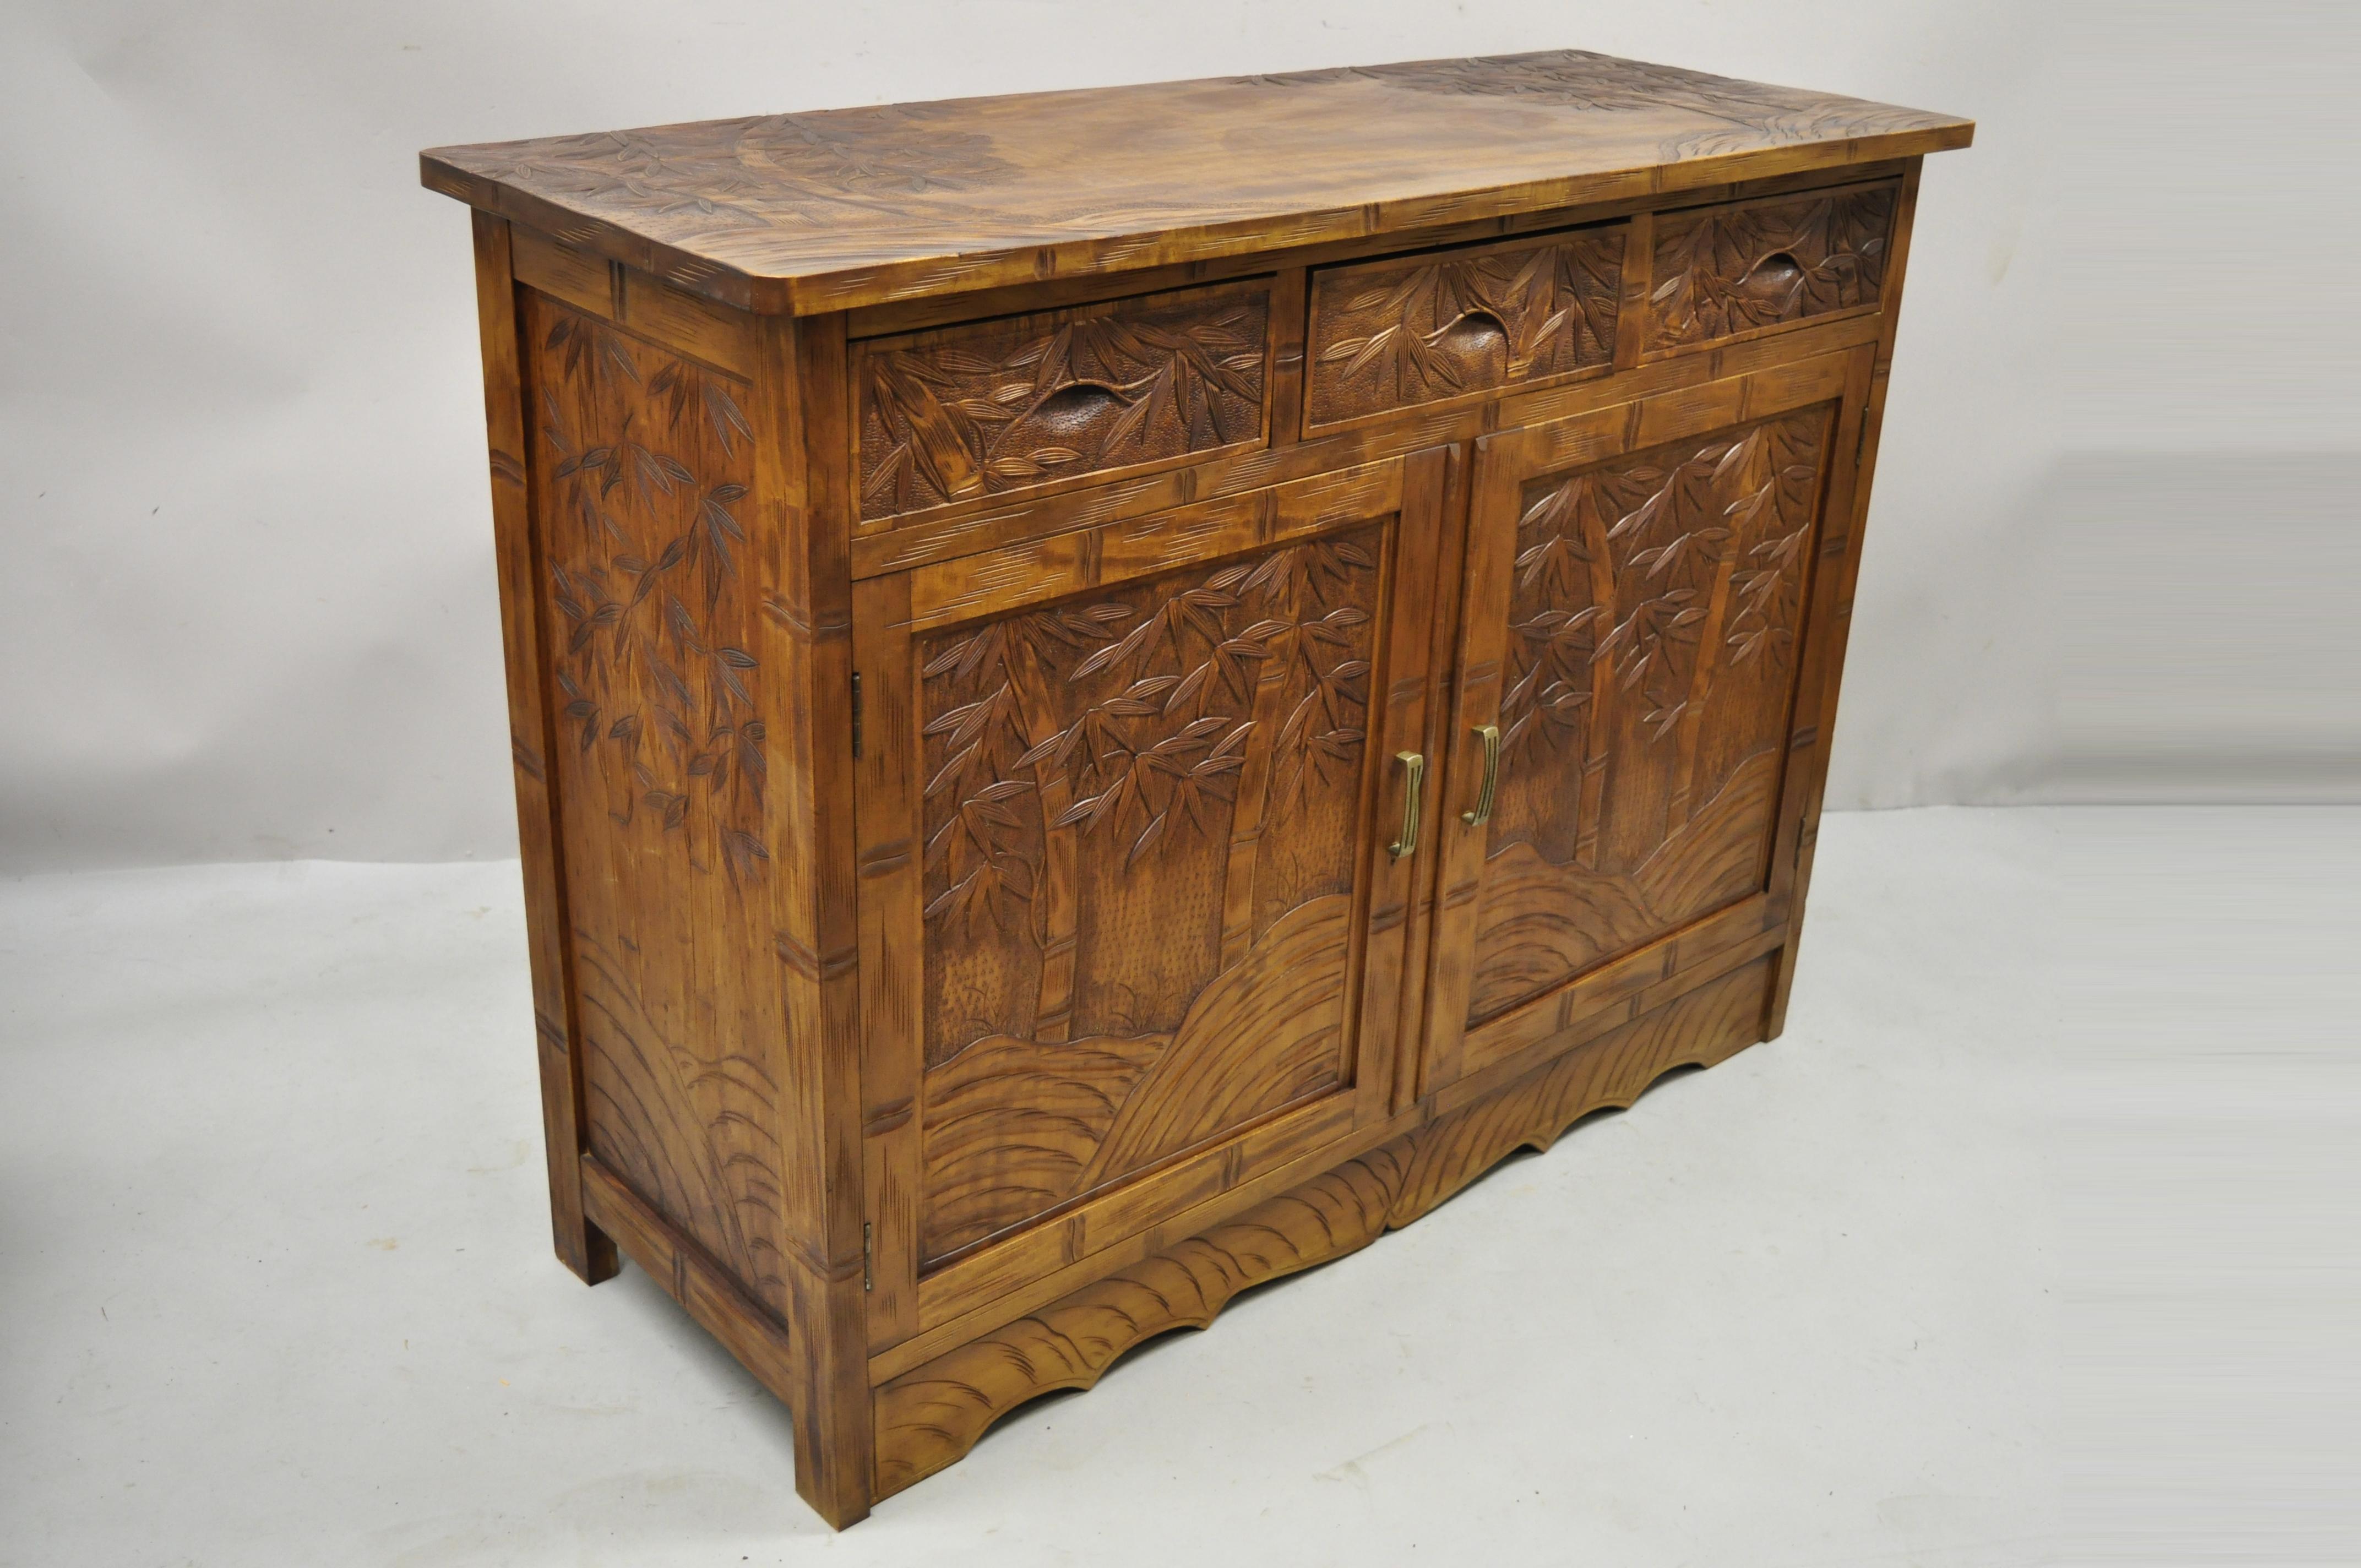 Vintage Chinese teak wood carved bamboo tree sideboard buffet cabinet. Item features carved wood bamboo tree raised panel design to fronts, sides, and top, solid wood construction, beautiful wood grain, 2 swing doors, 3 drawers, very nice vintage